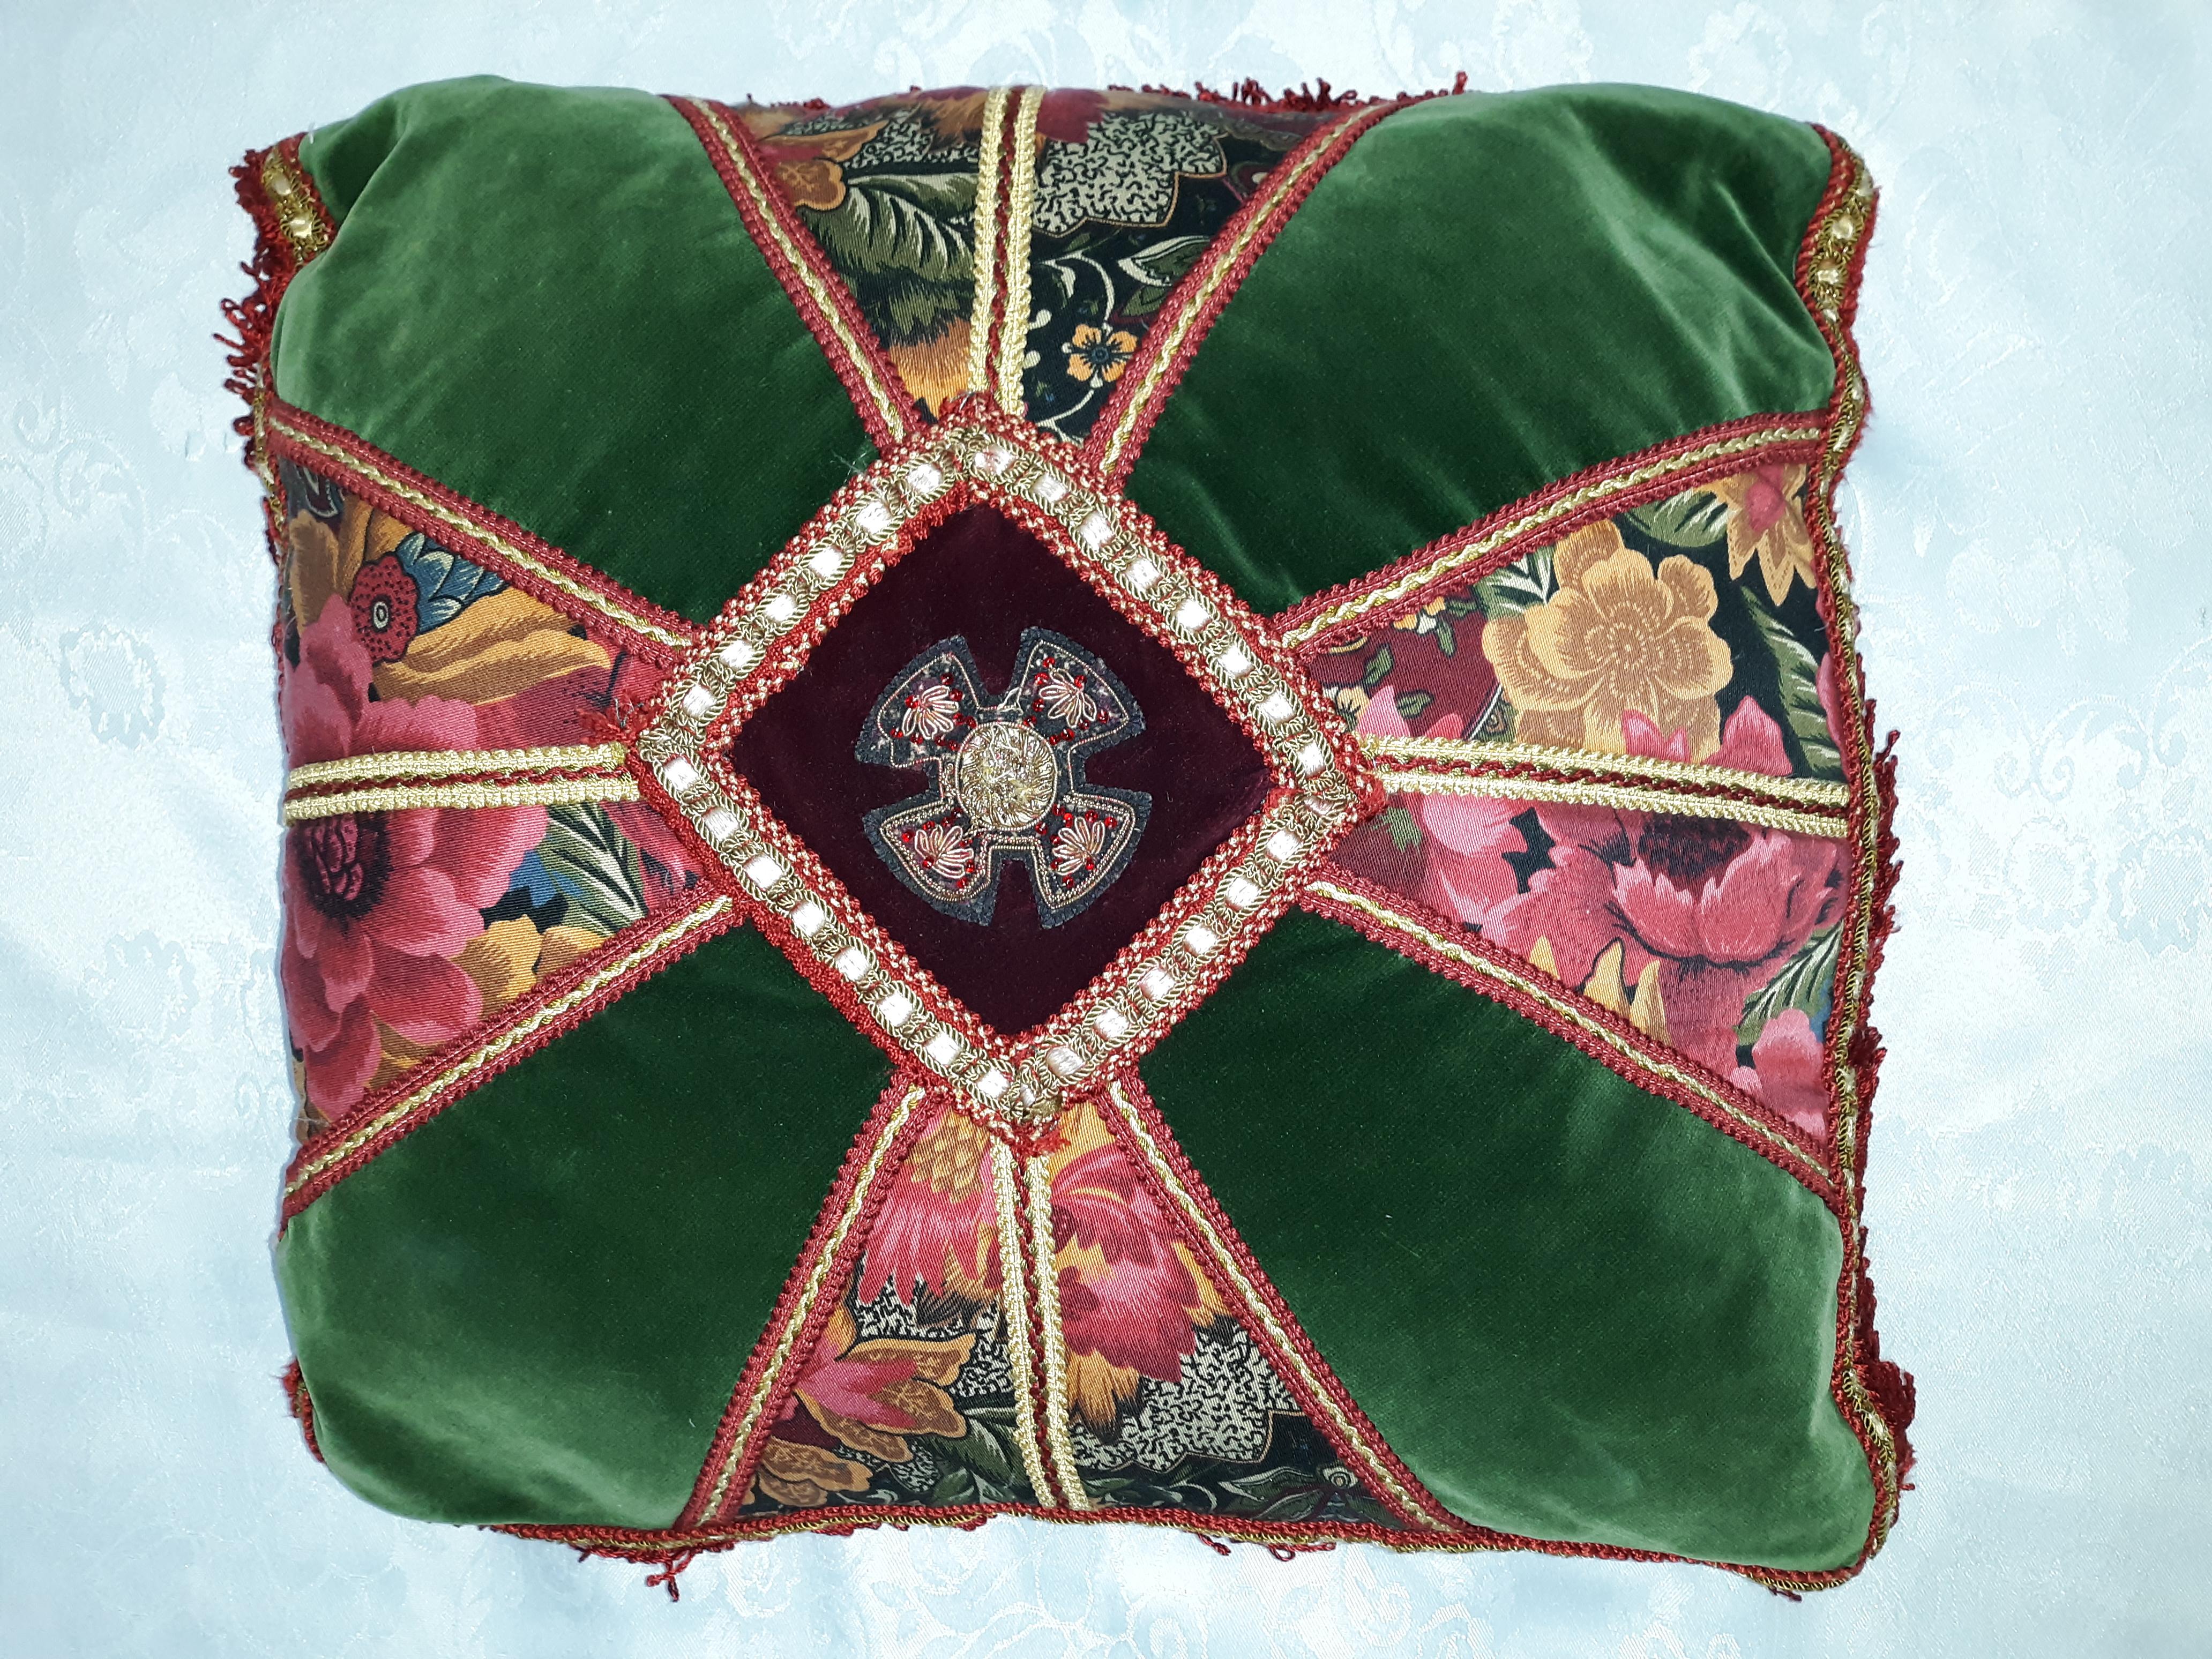 Amazing deal on these gold threaded Antique embroidered cushion set Est. 1930 green & red velvet with gold thread. These are absolutely beautiful, and rare to find. They will make the couch, bed, or sofa on which they are placed.

Good